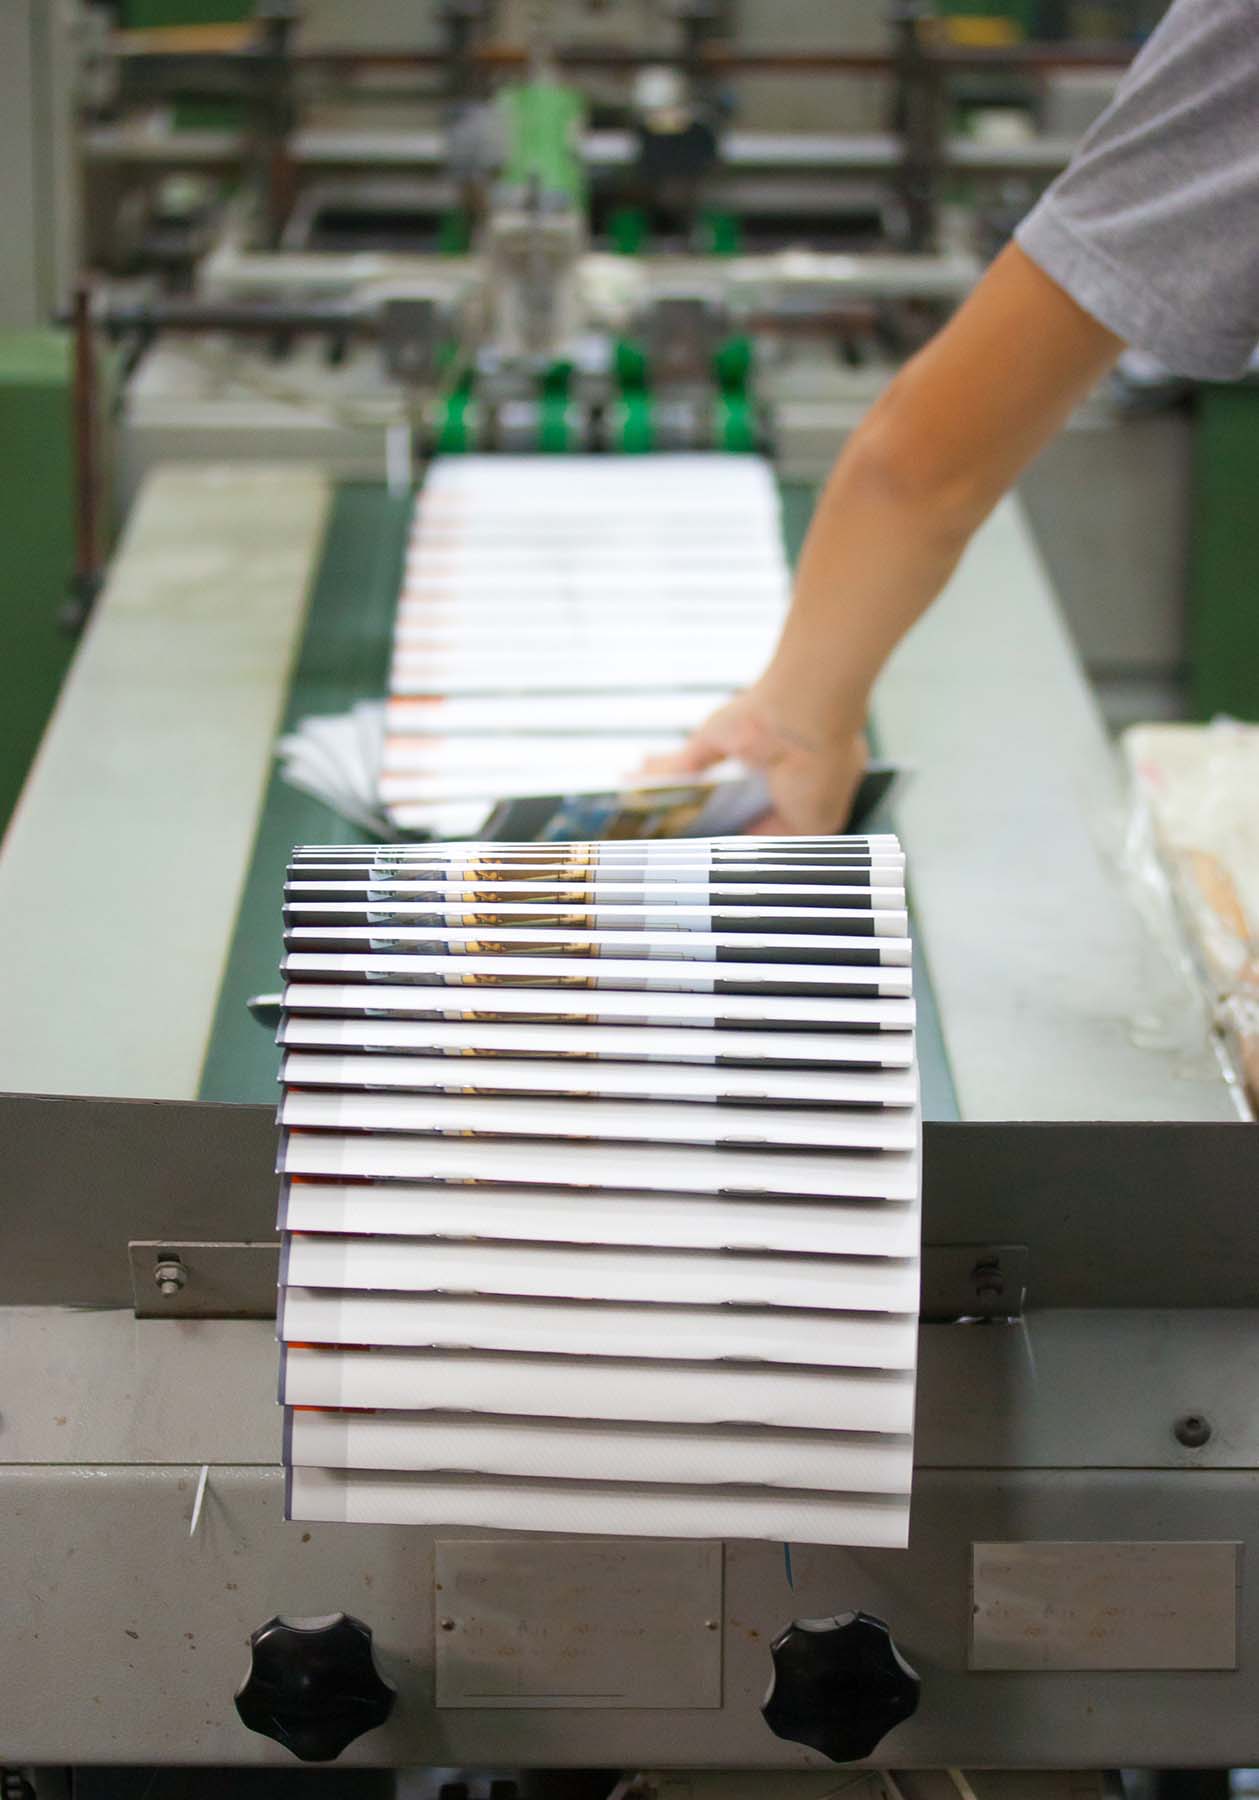 Picture of a finishing press with printed booklets on it